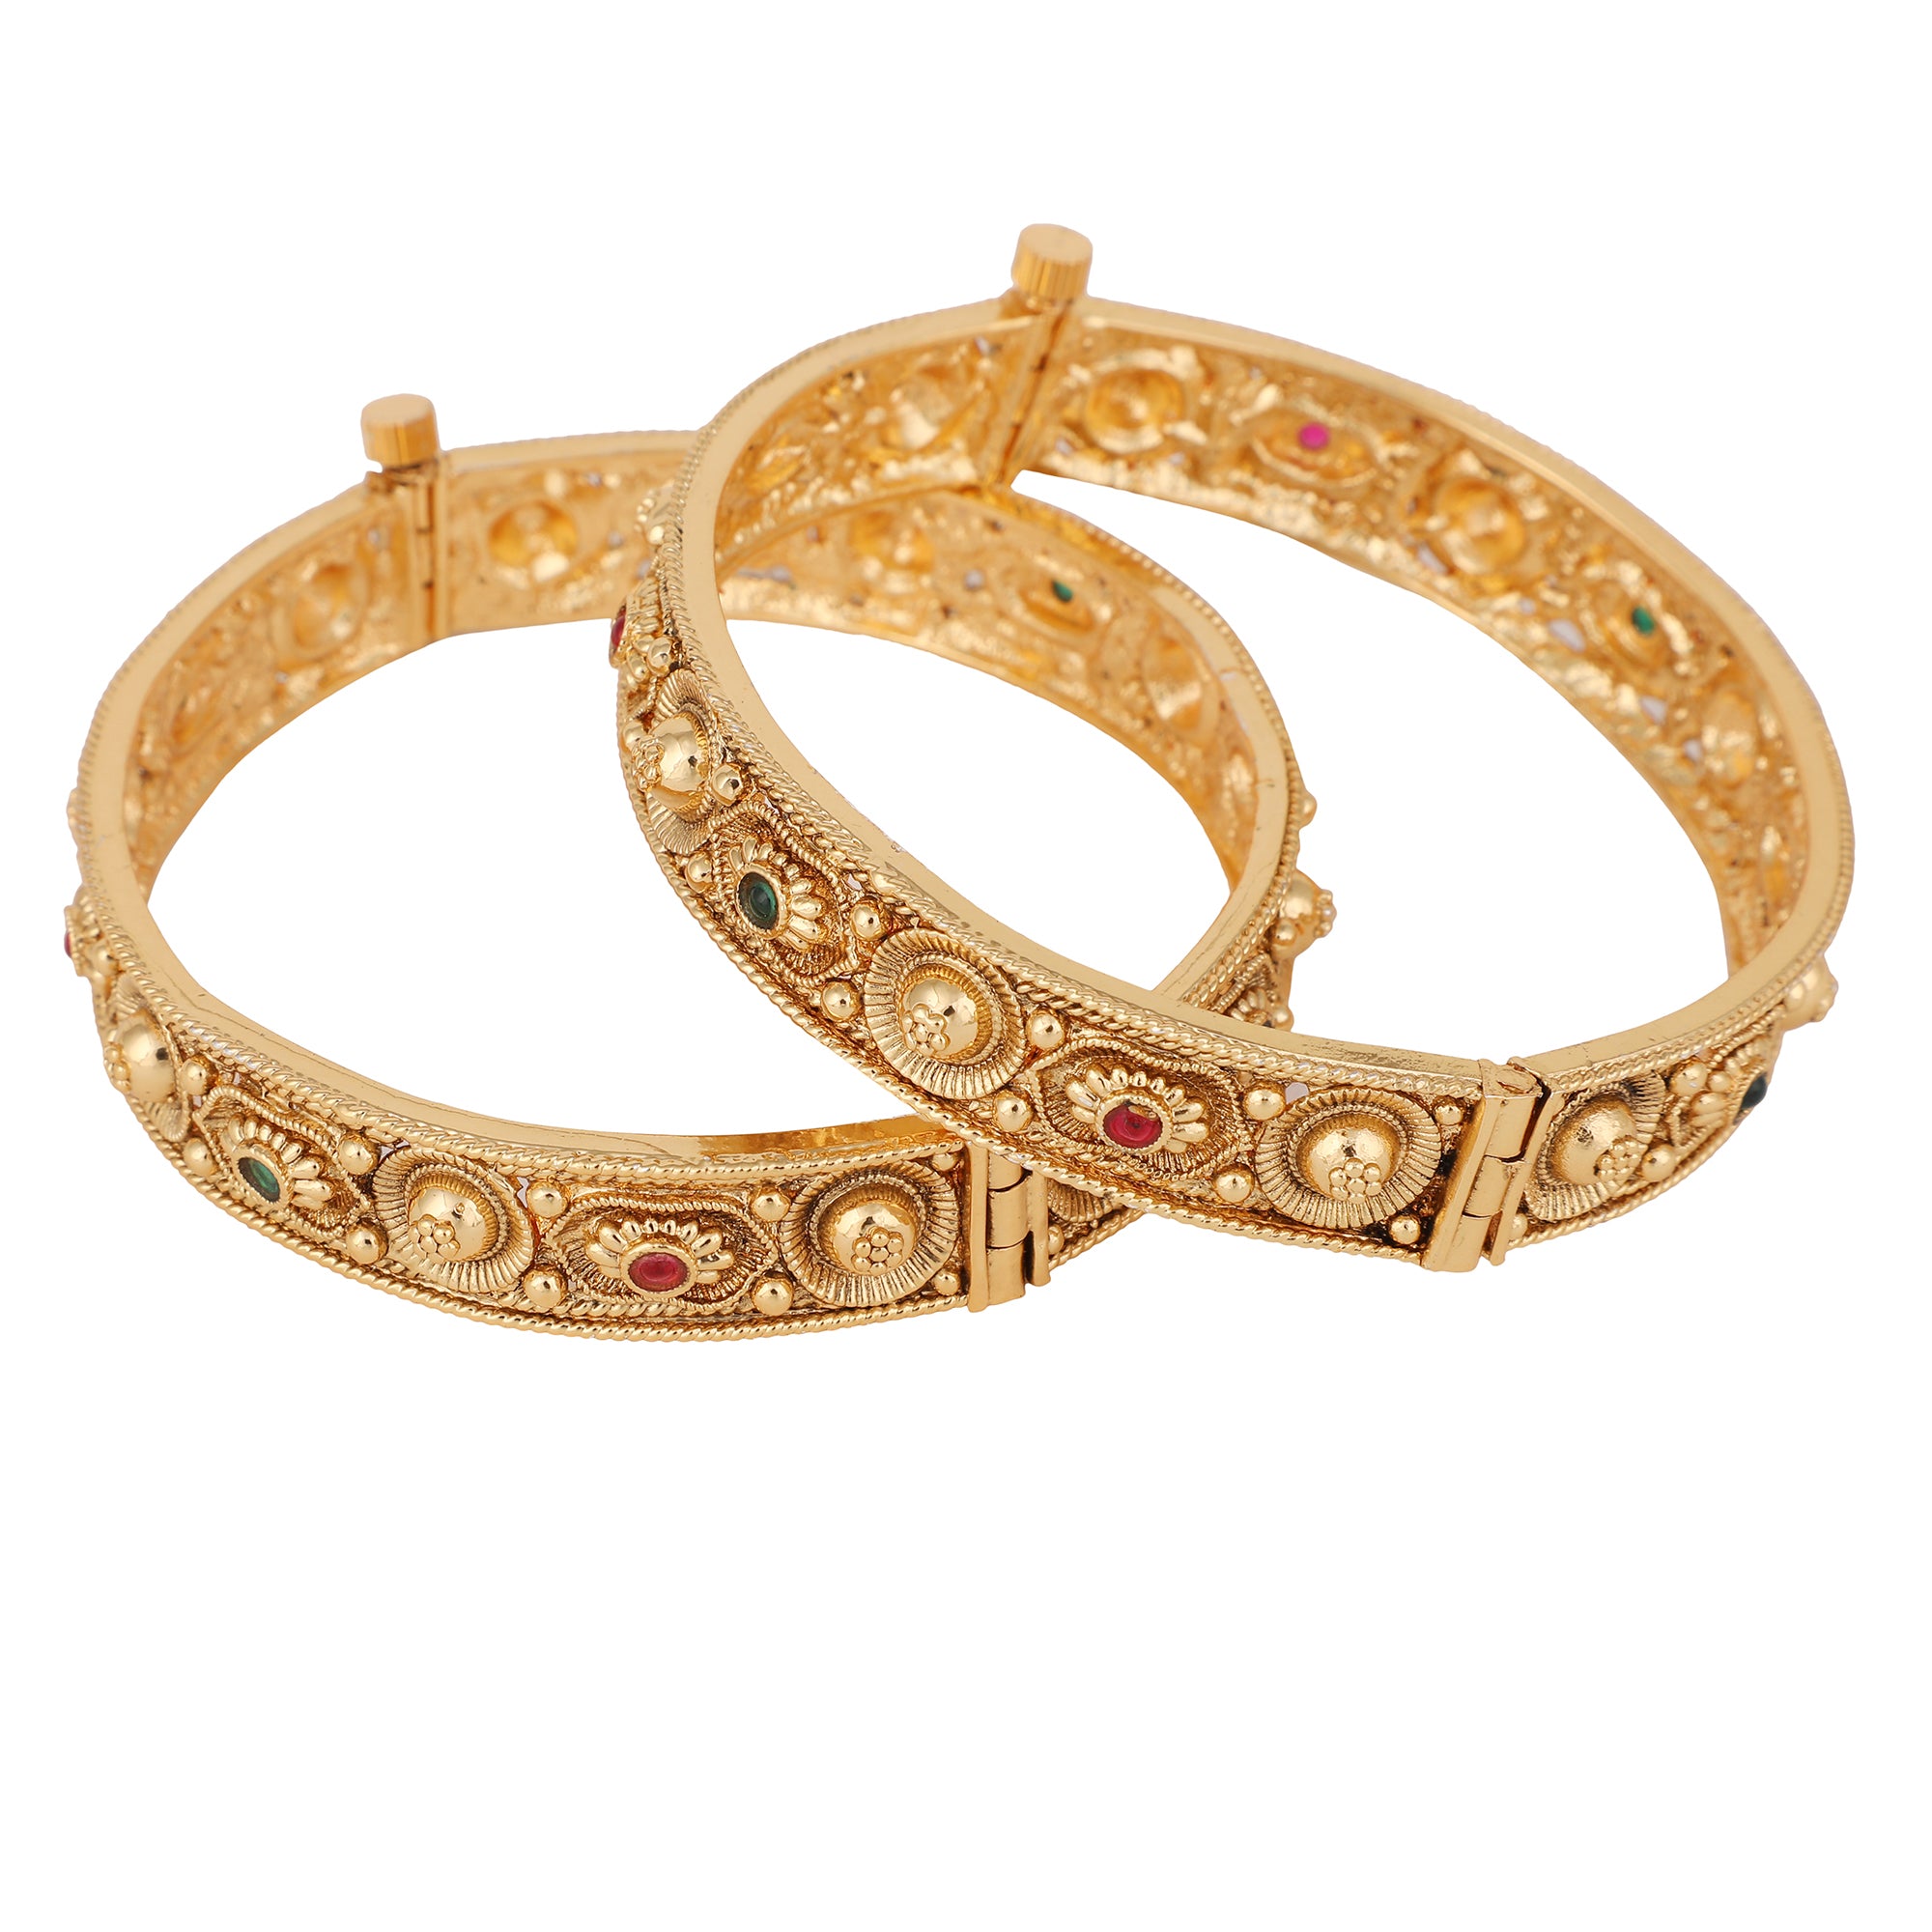 Women's Set Of 2 24K Gold-Plated & Pink Stone-Studded Hand Crafted Filigree Bangles - Anikas Creation